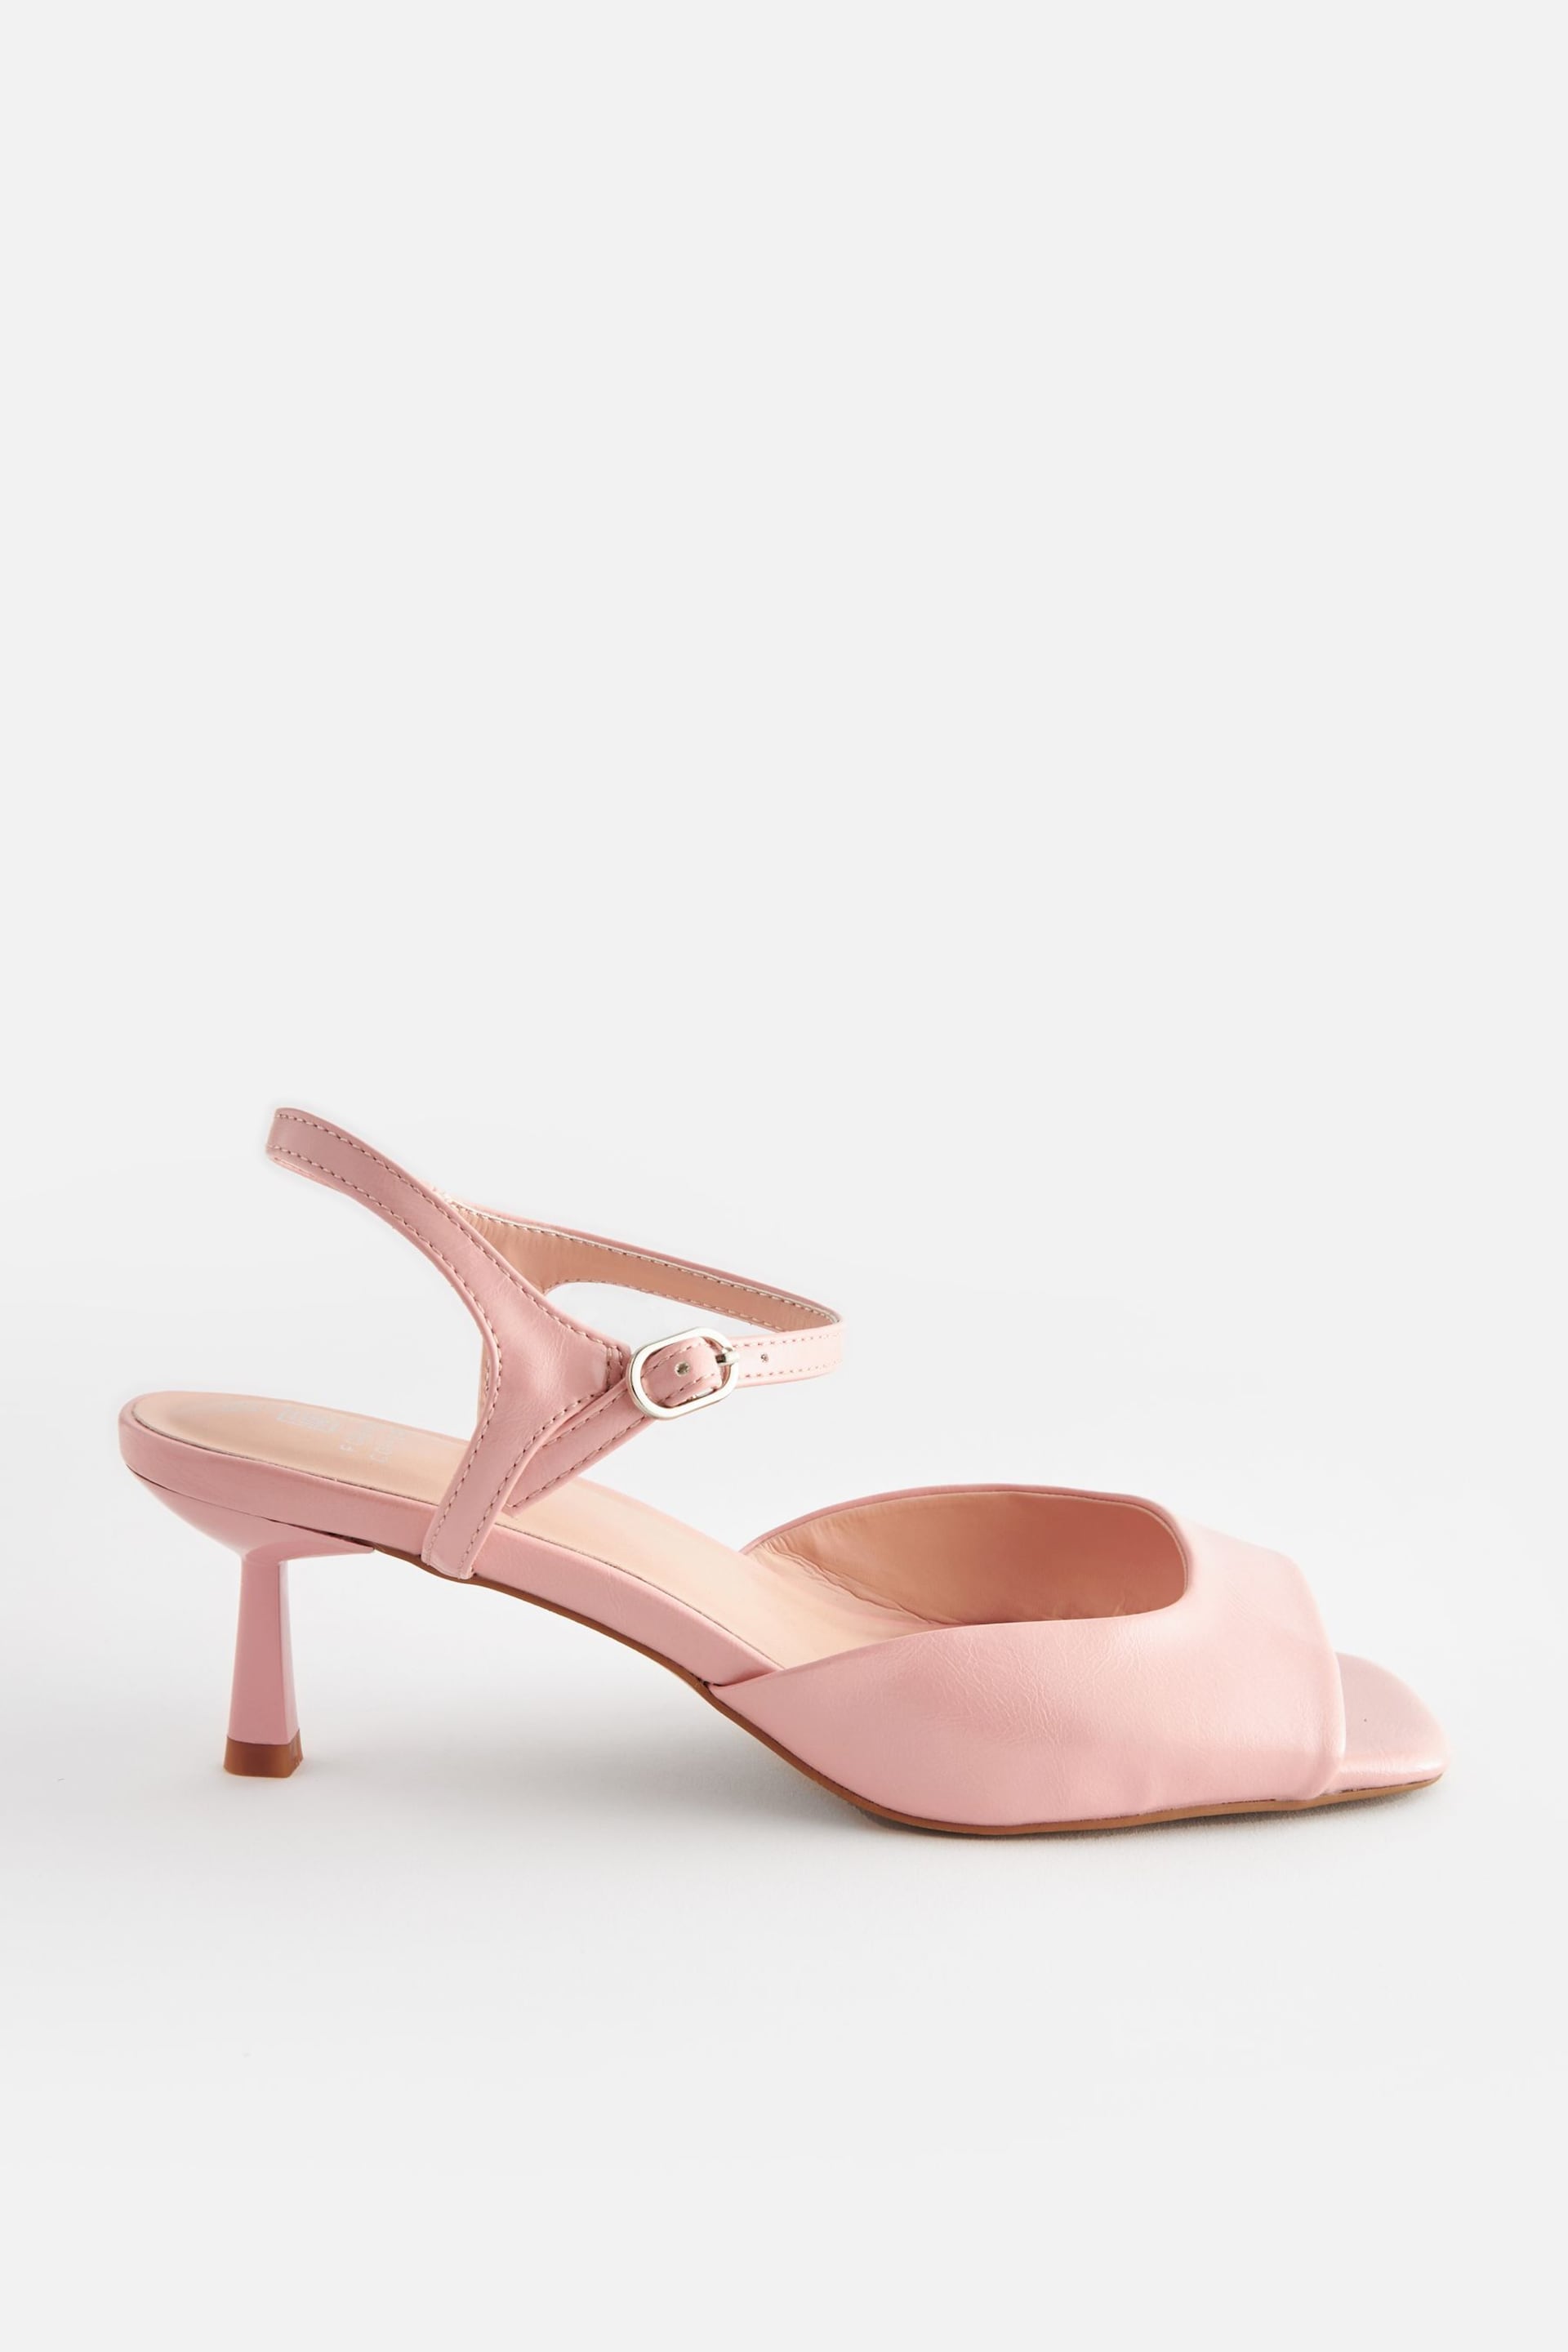 Nude Forever Comfort® Low Simple Sandals - Image 2 of 6